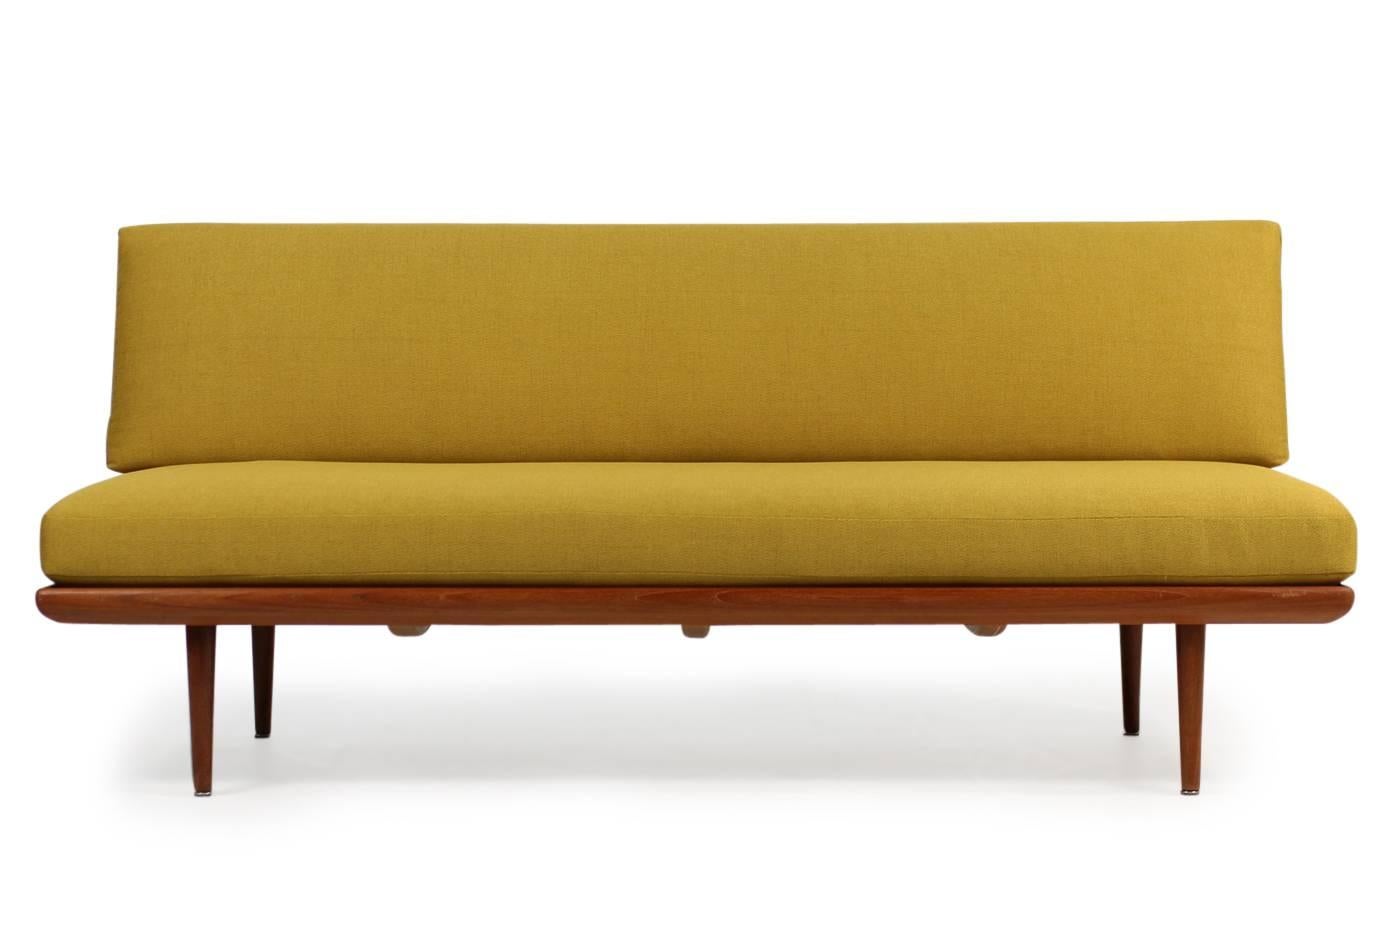 Beautiful 1960s Danish modern daybed, designed by Peter Hvidt & Orla Mølgaard Nielsen, produced by France & Son, marked. Renewed upholstery and covered with high quality woven fabric in 'curry' (dark yellowish tone) a beautiful condition, also the